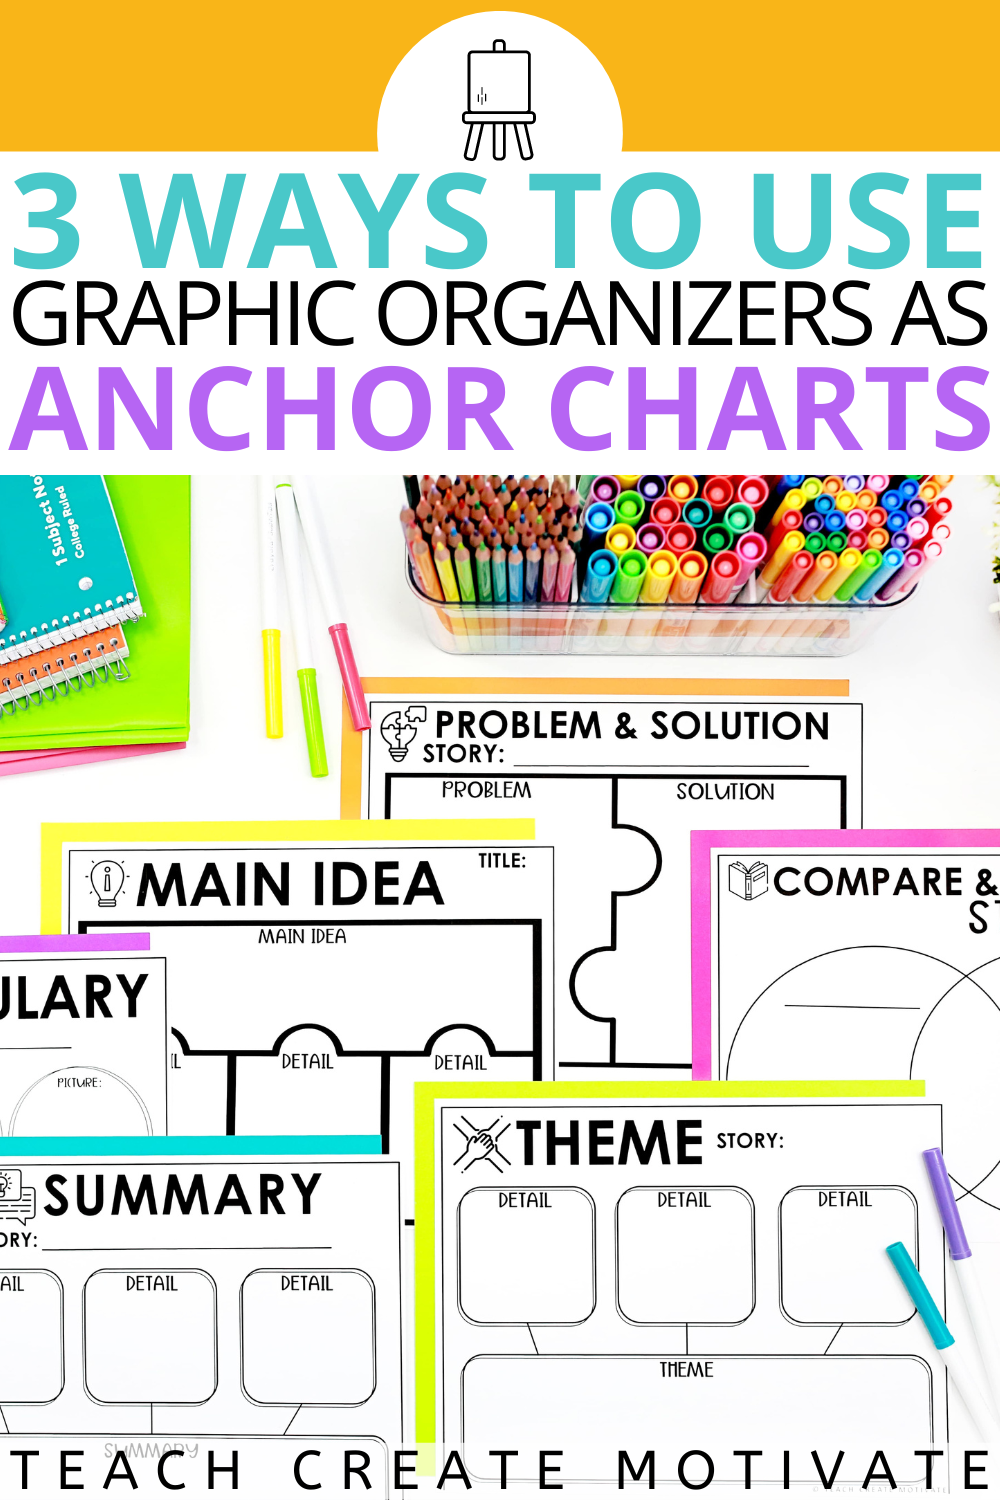 Sharing is Caring: Ideas, Tools, and Charts